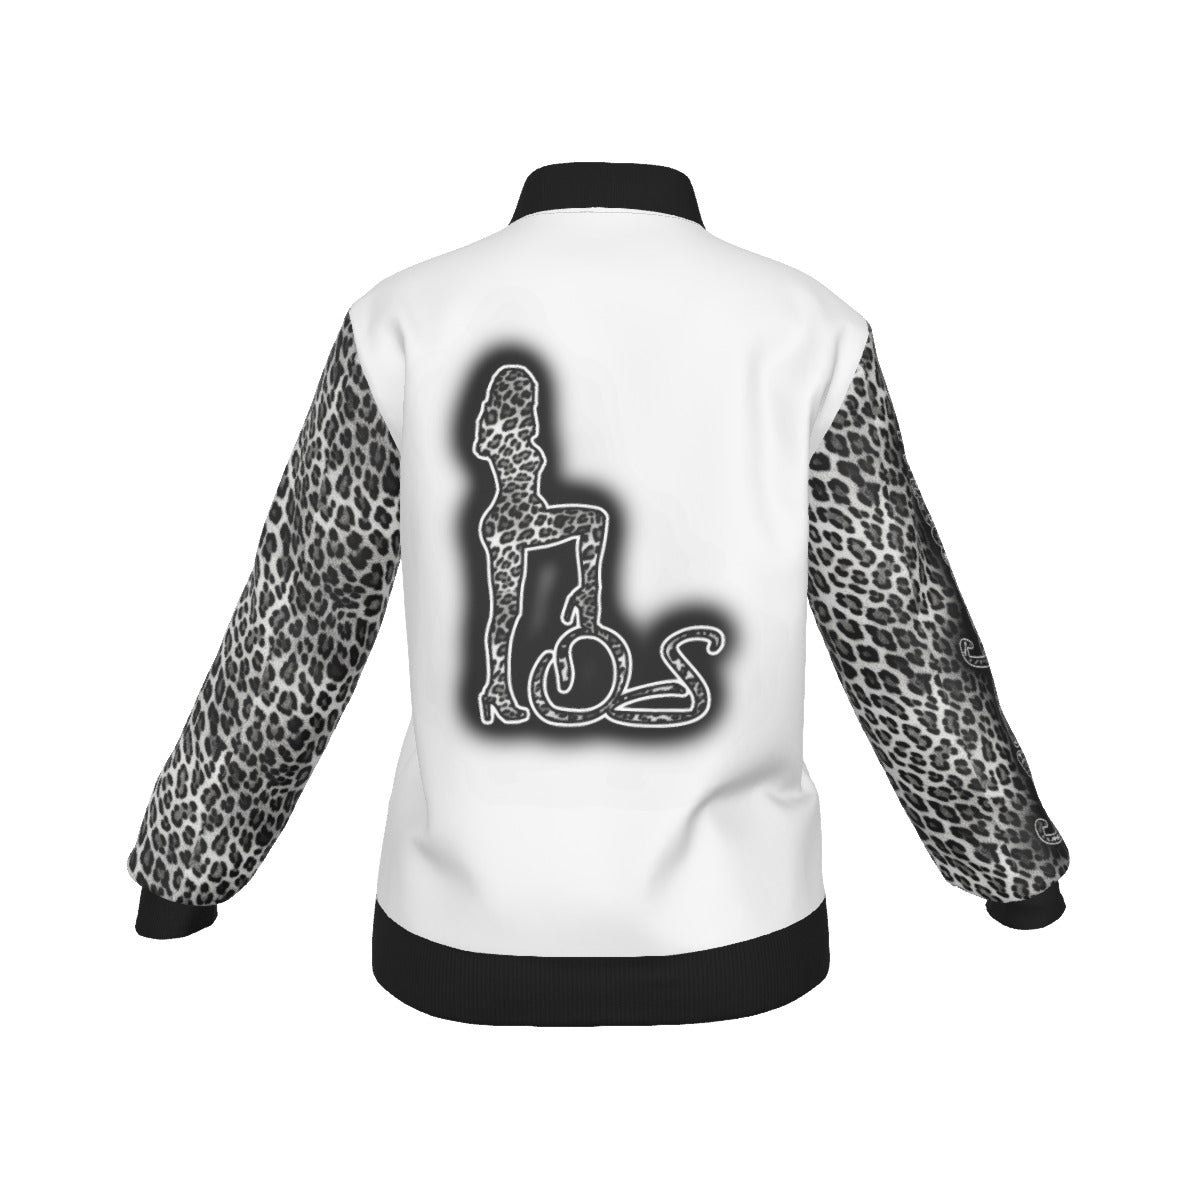 Officially Sexy Snow Leopard Collection Women's White Jacket Small Print Logo On Back (English) 4 3